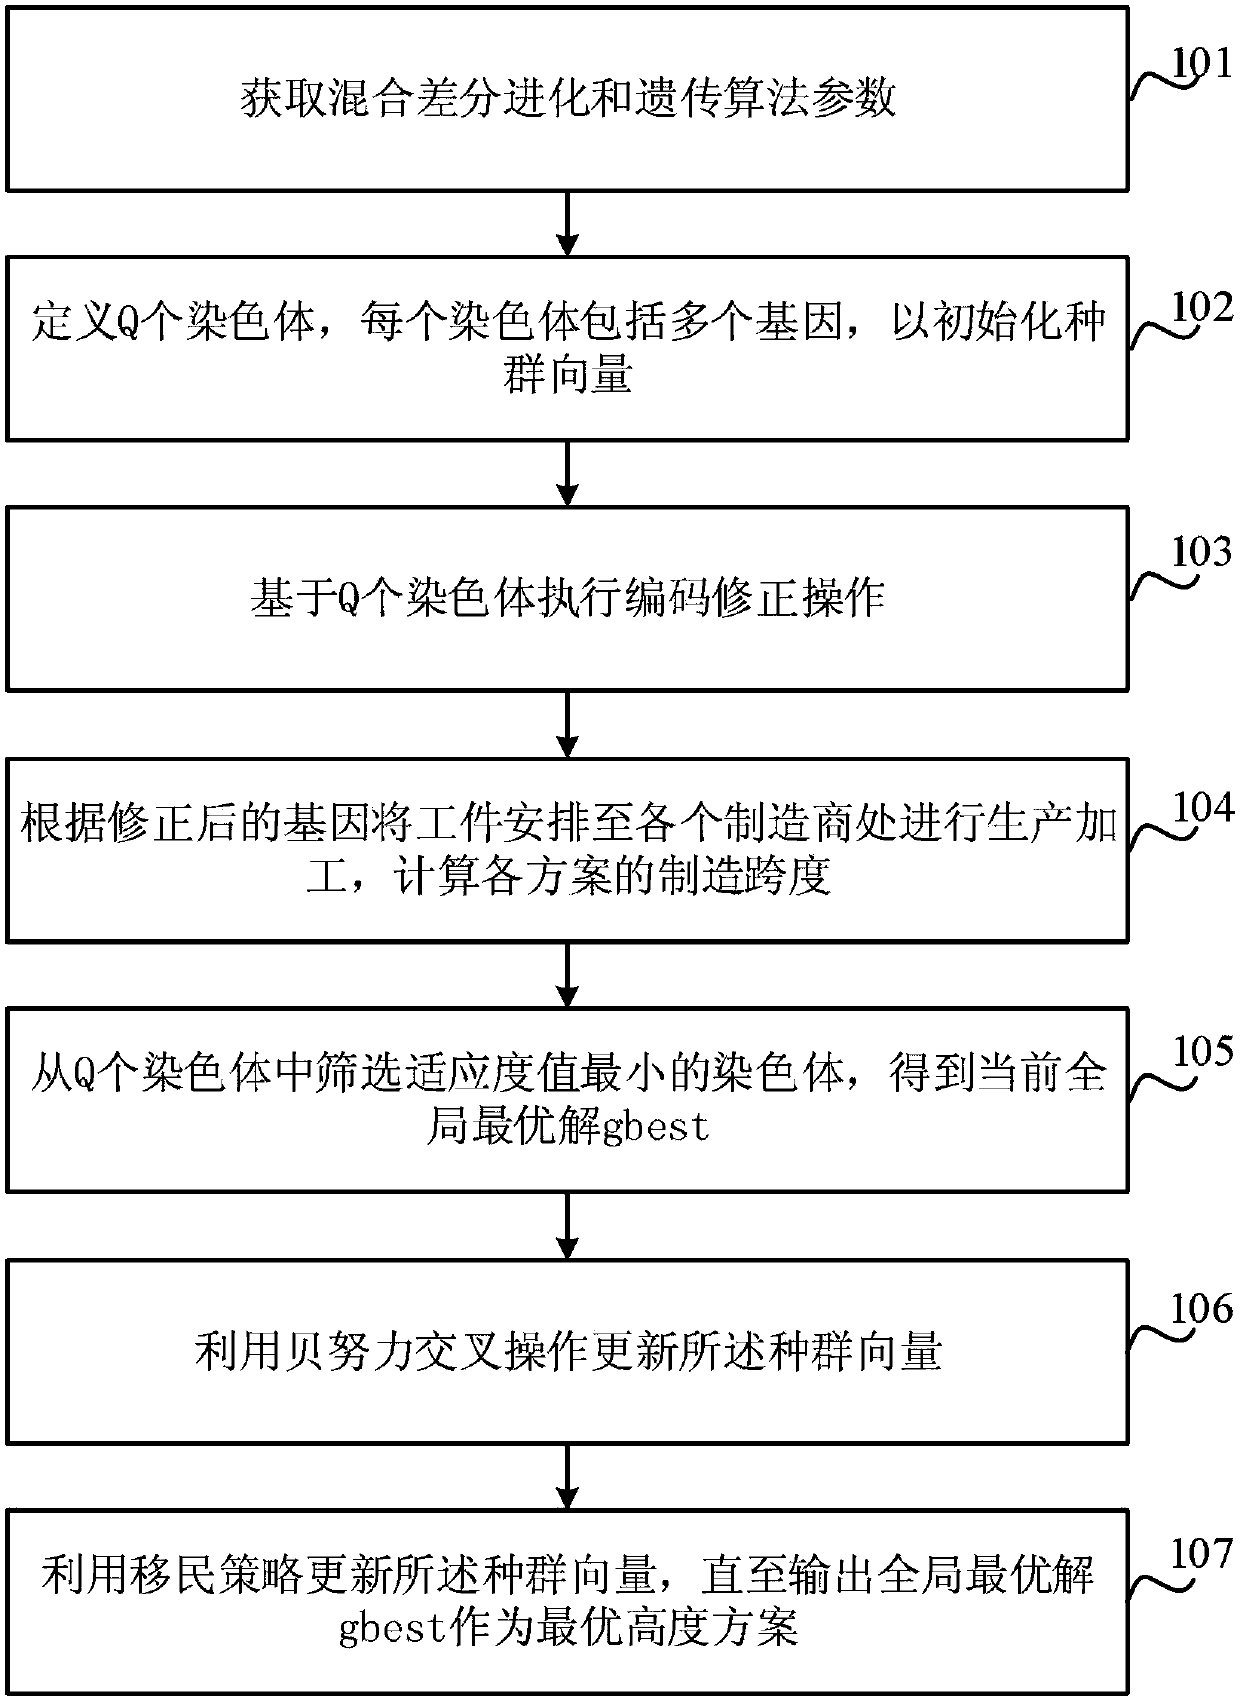 Collaborative scheduling method of high-end equipment manufacturing process, based on hybrid differential genetic algorithm